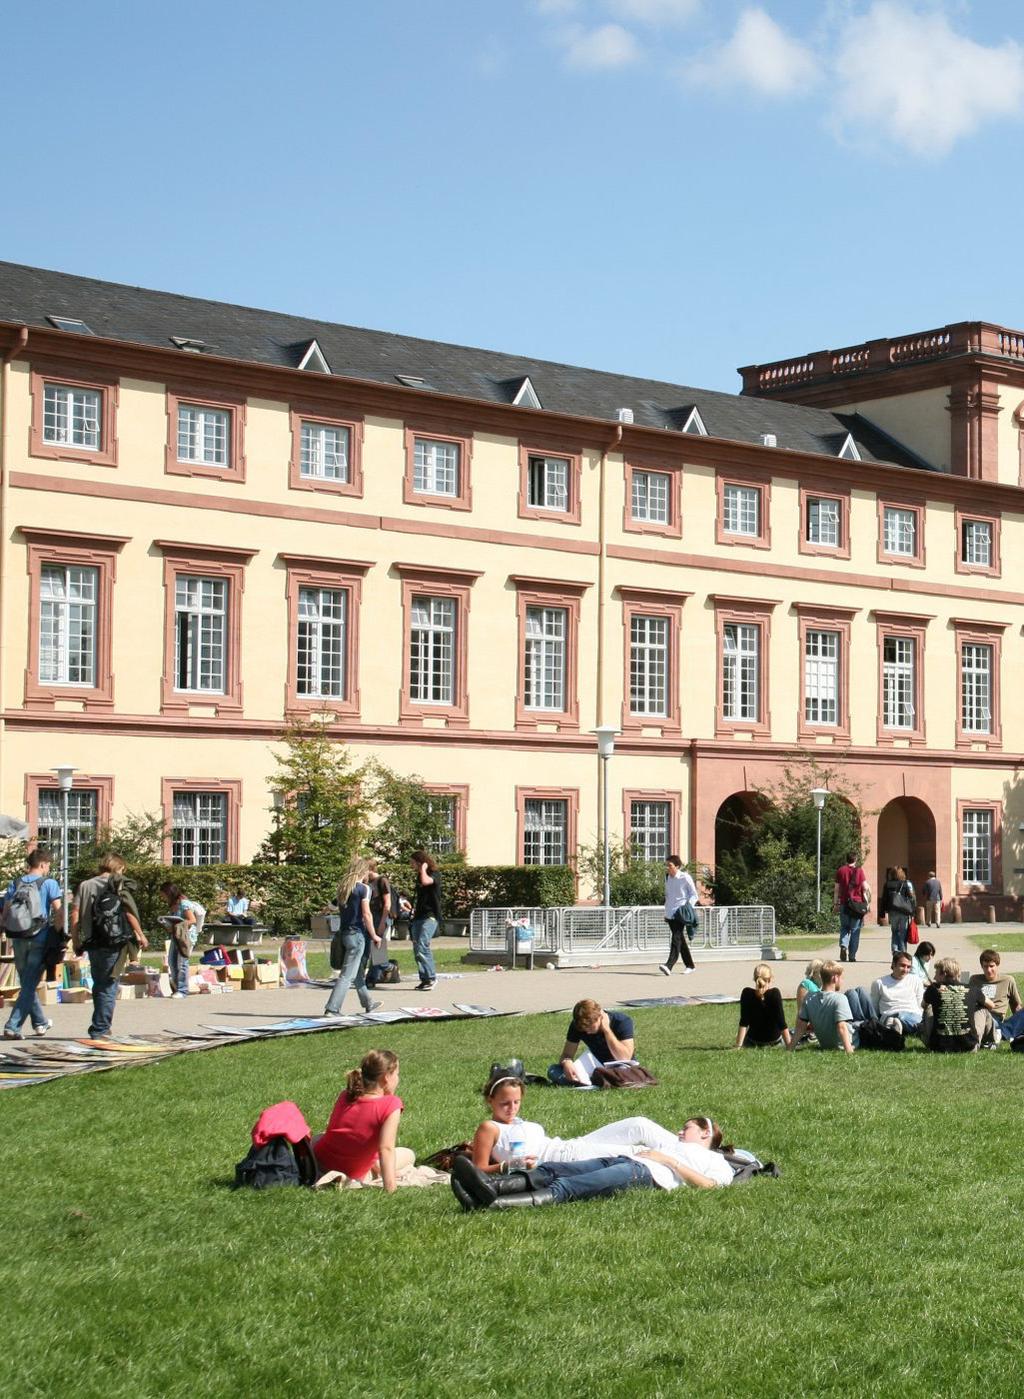 Why the University of Mannheim?